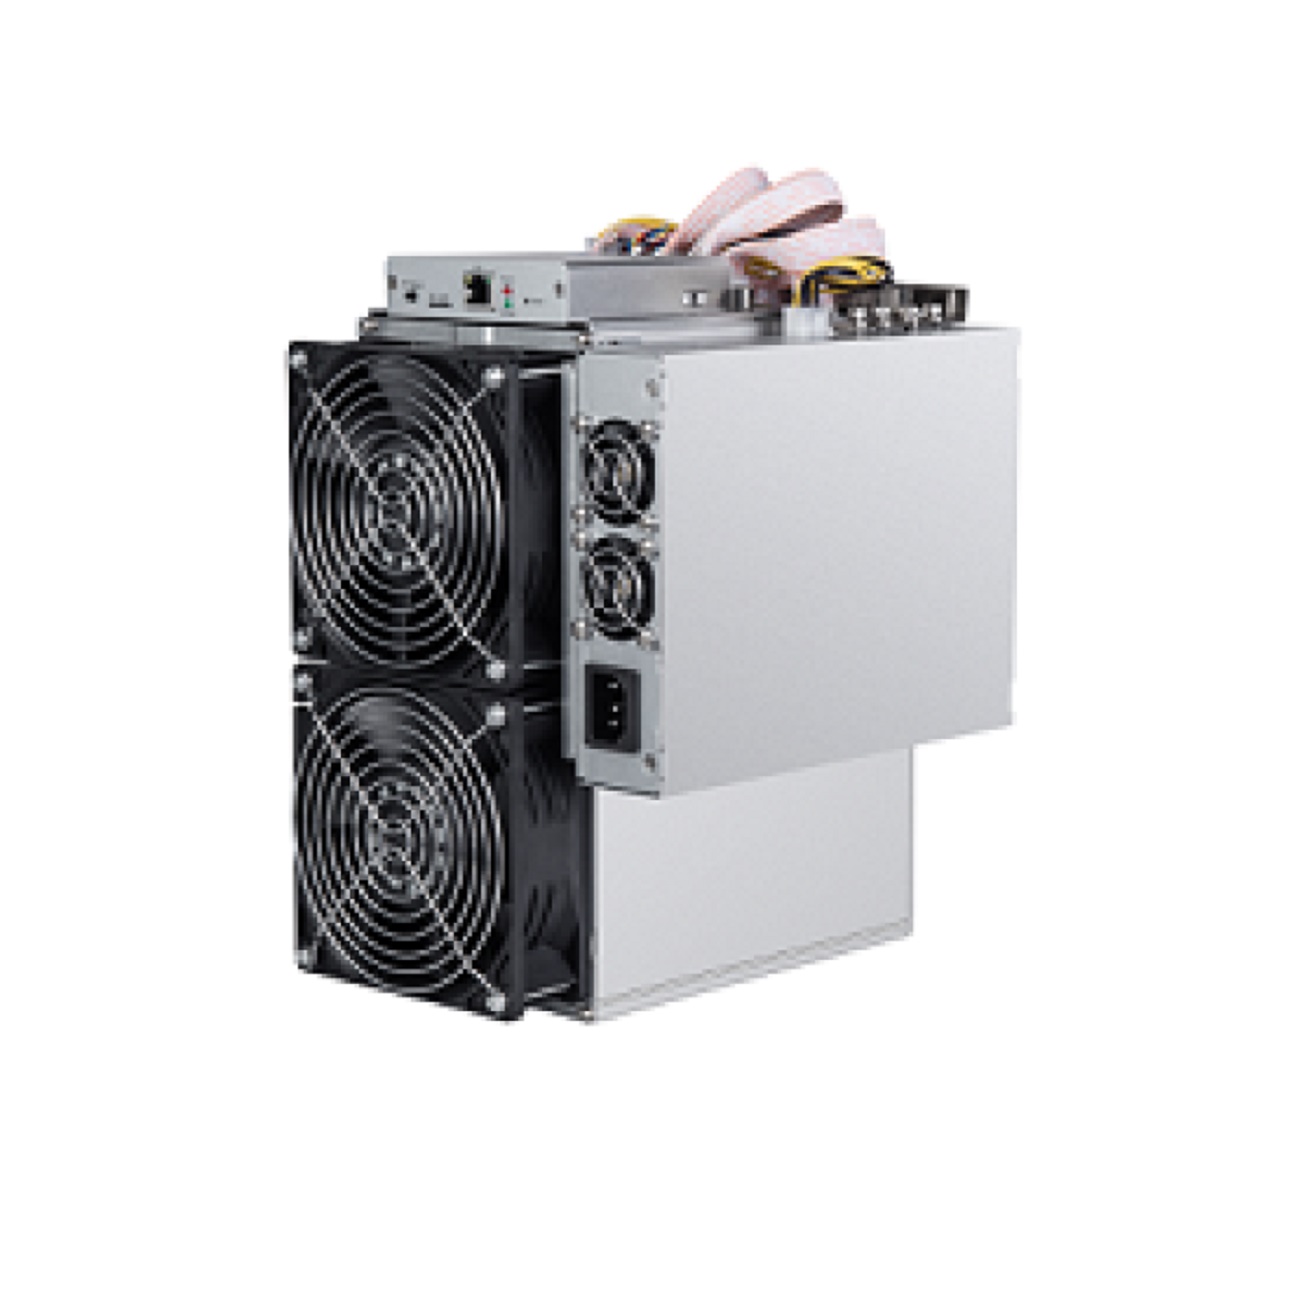 Antminer T15 23 TH